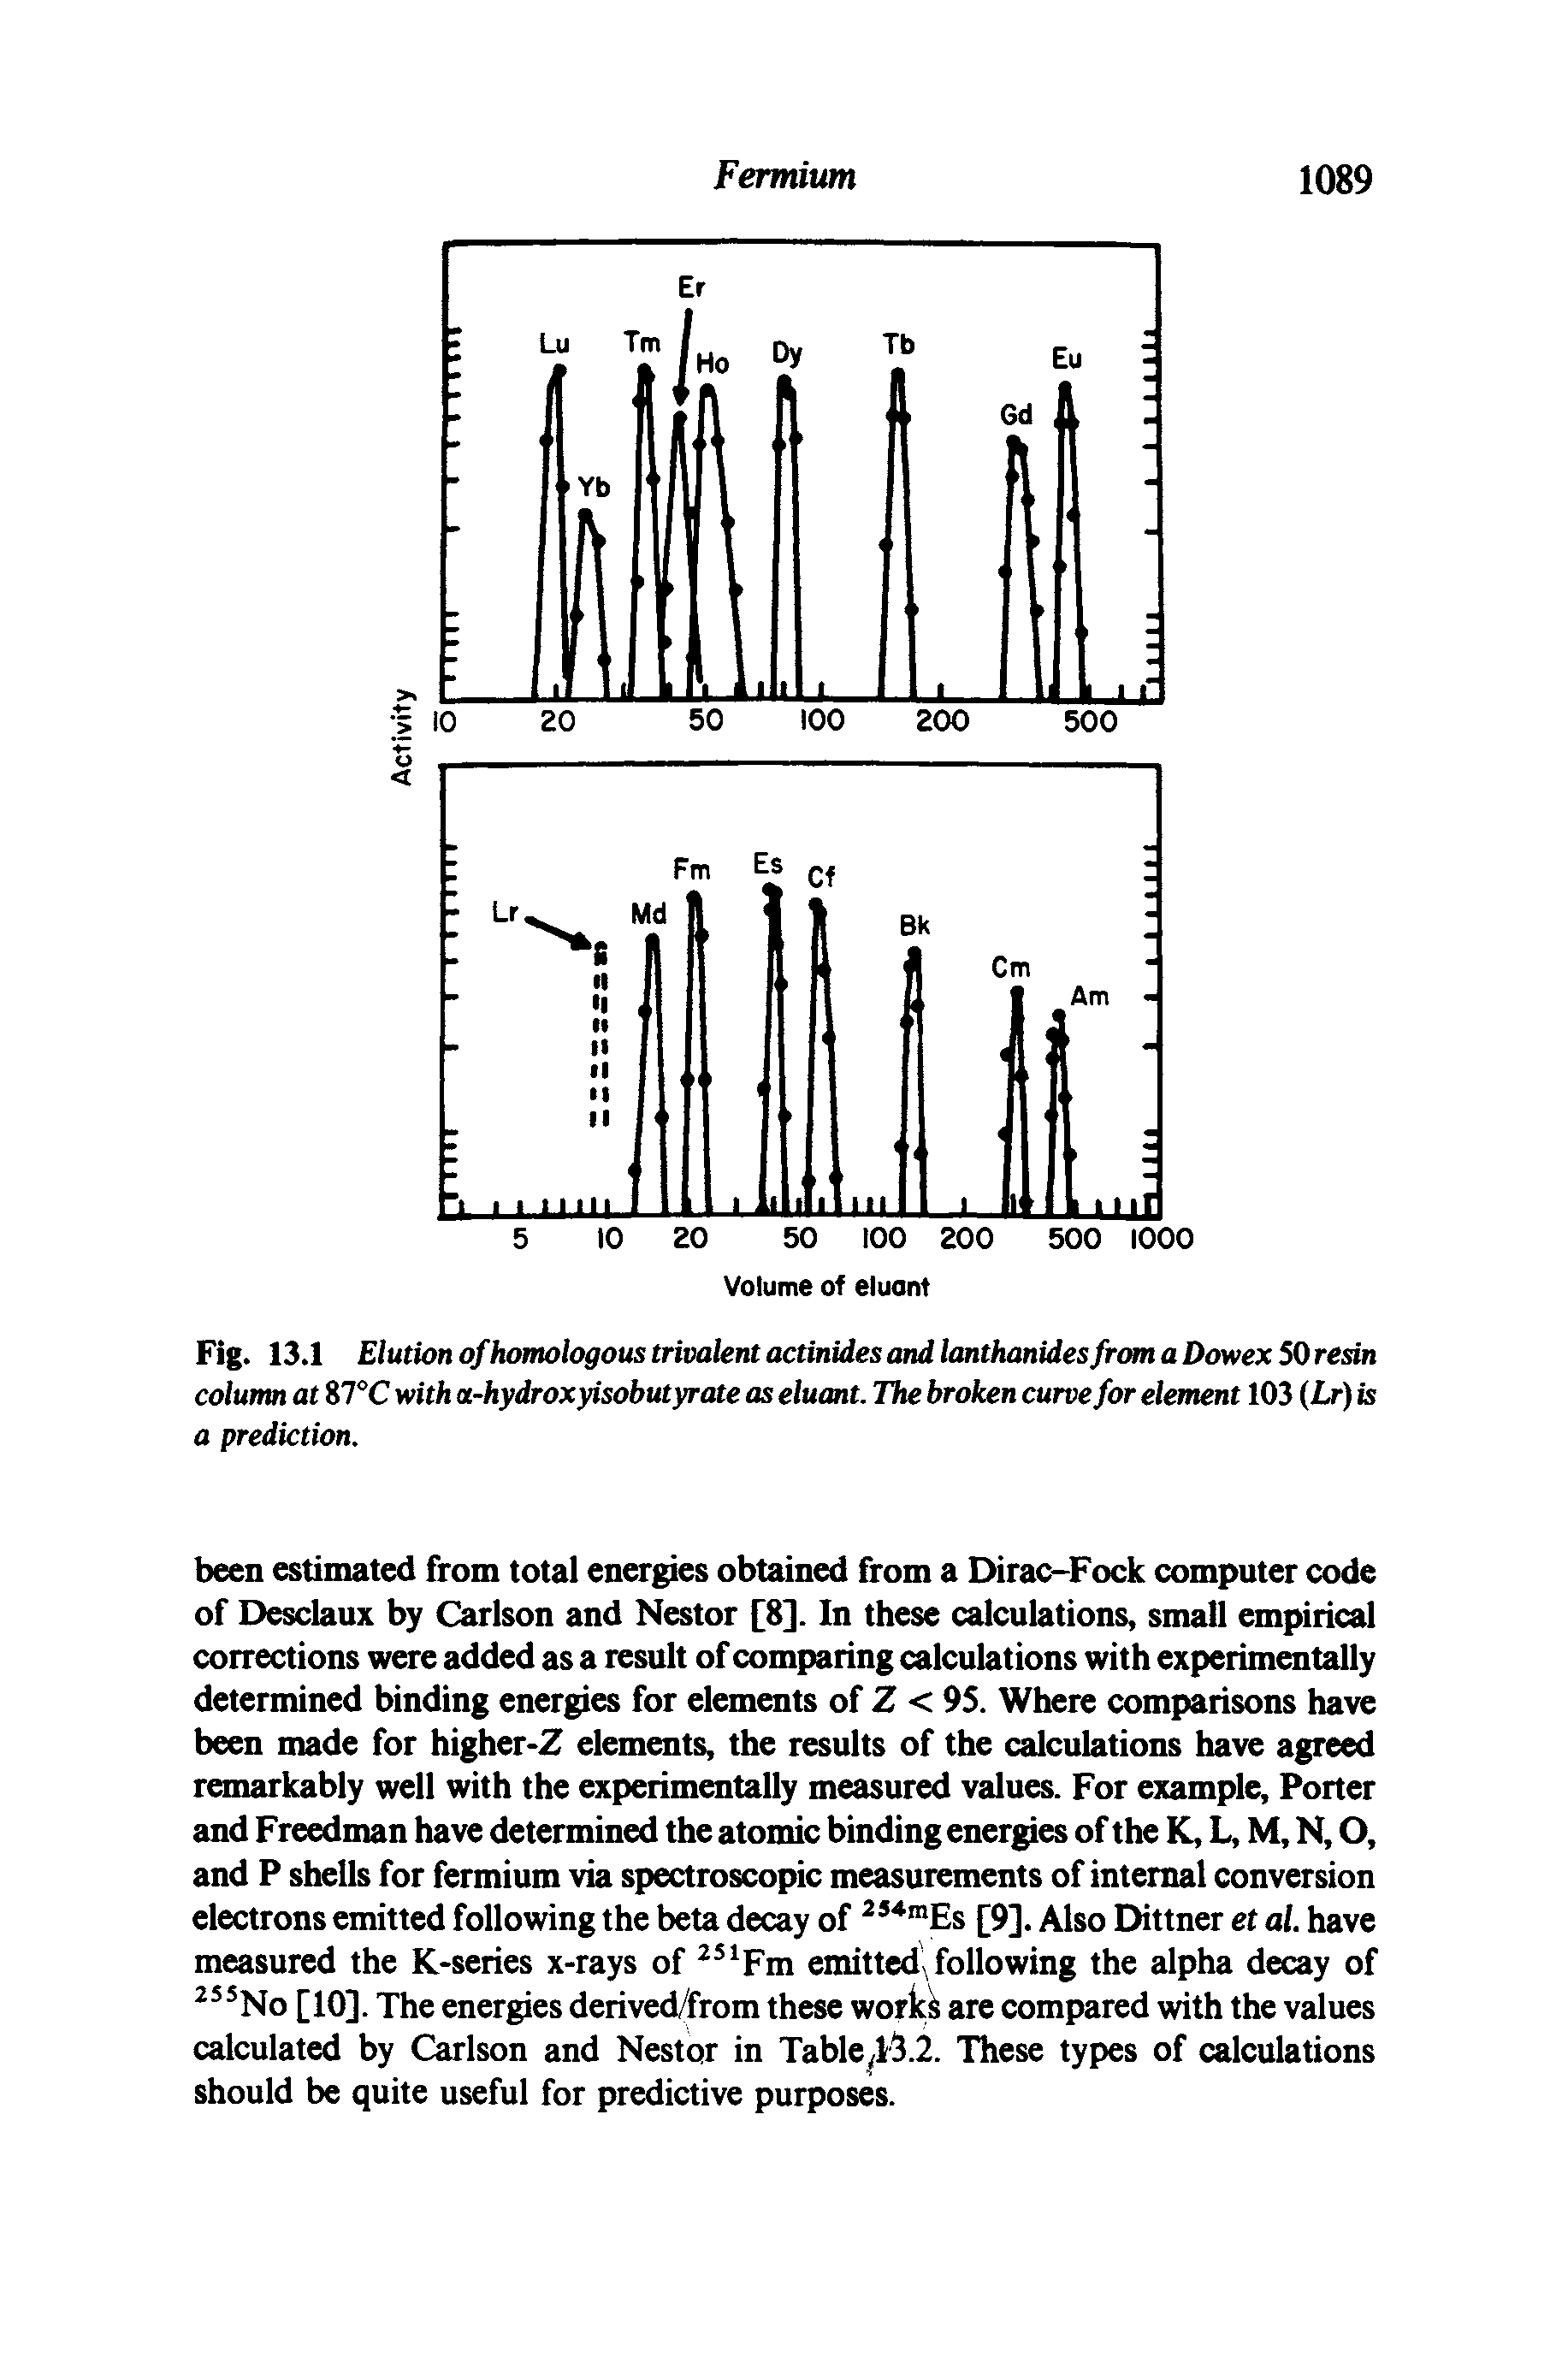 Fig. 13.1 Elution of homologous trivalent actinides and lanthanides from a Dowex 50 resin column at ZTC with a-hydroxyisobutyrate as eluant. The broken curve for element 103 (Lr) is a prediction.